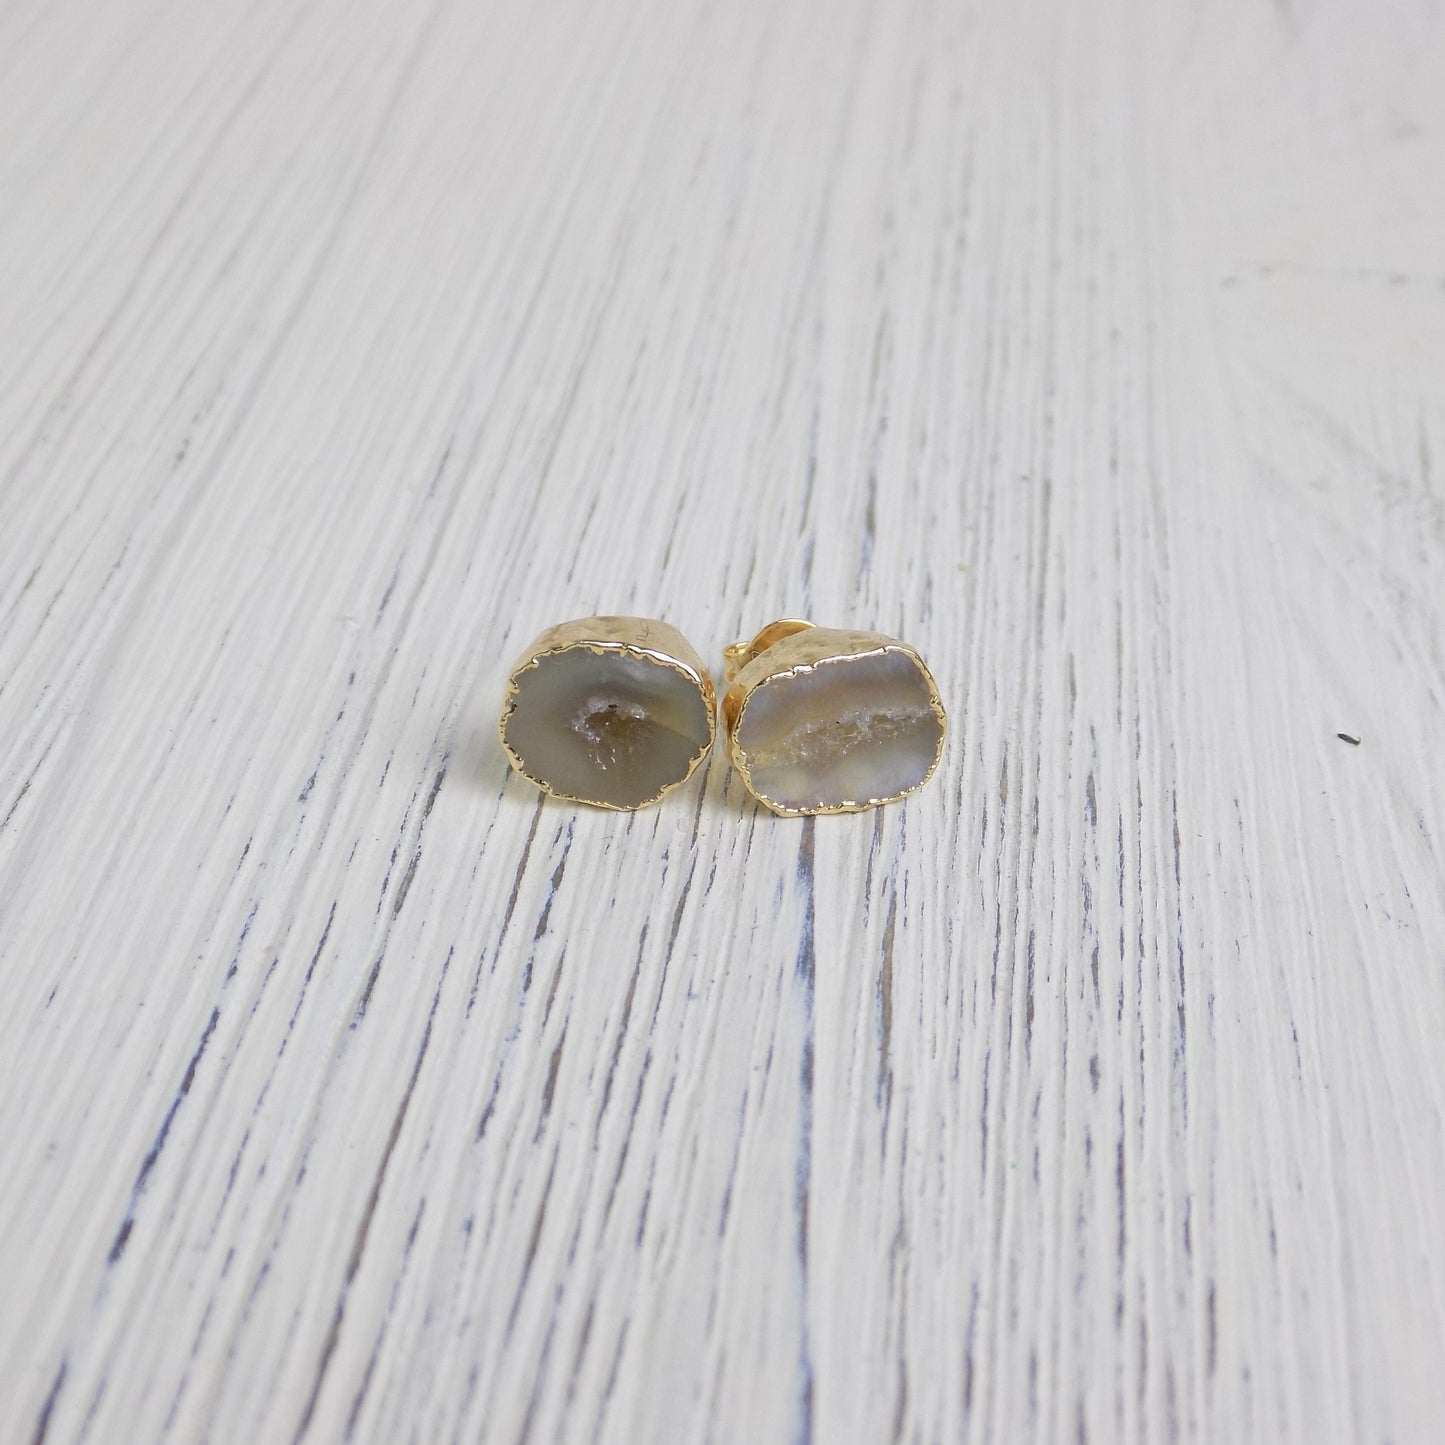 Unique Gifts, Geode Earrings Stud, Natural Gemstone Posts, Sparkly Druzy Earring Drussy, Small Stone Gold, G14-218